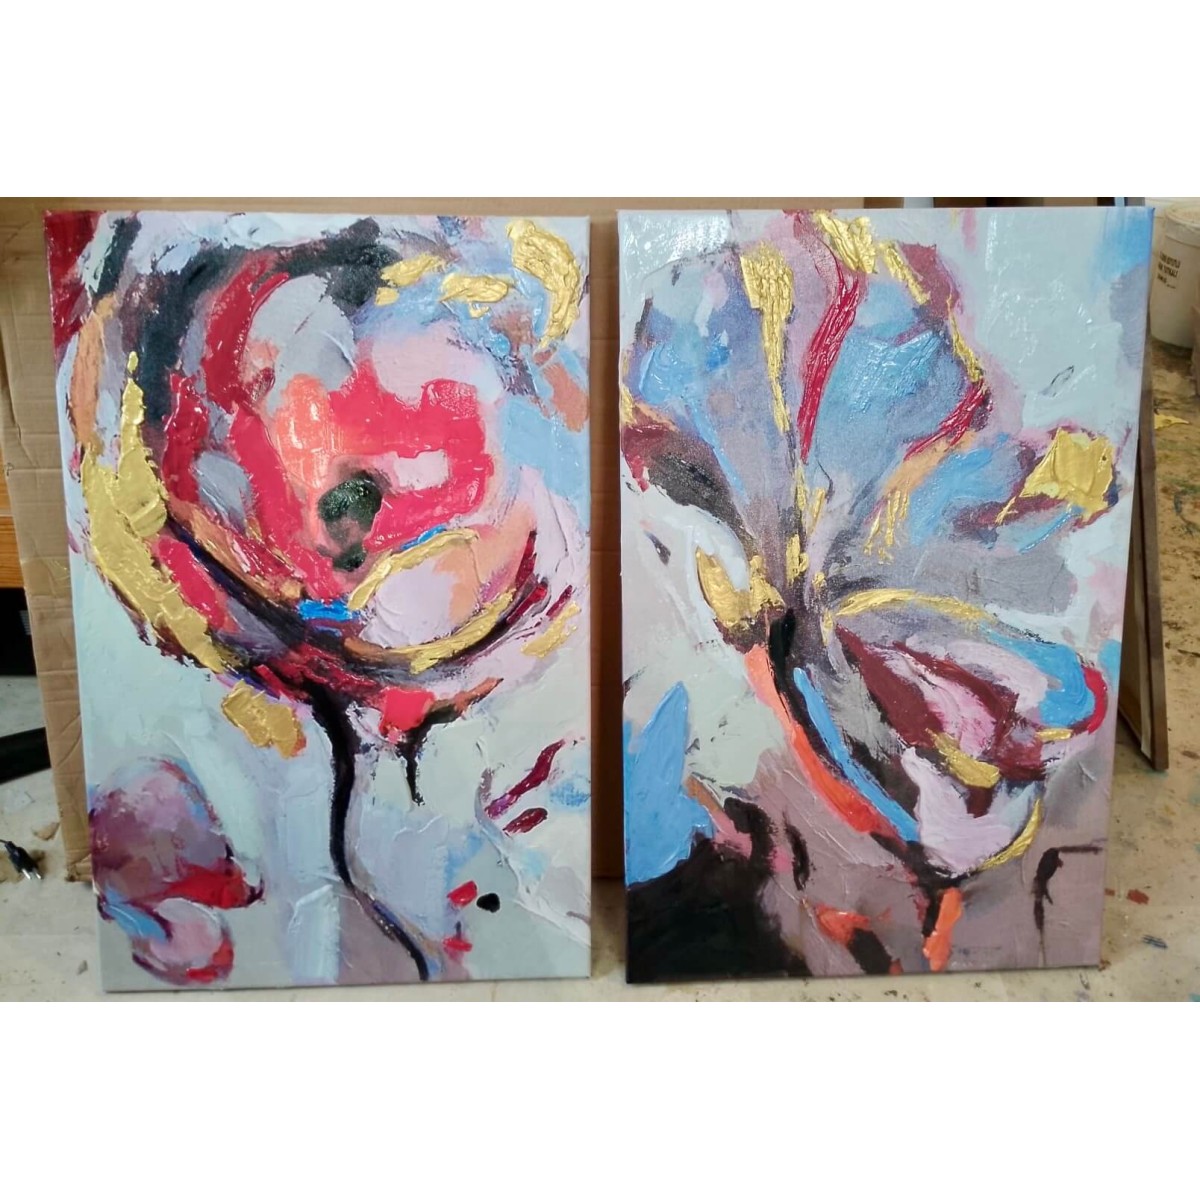 Dance of a Flower 2 Piece Textured Partial Oil Painting